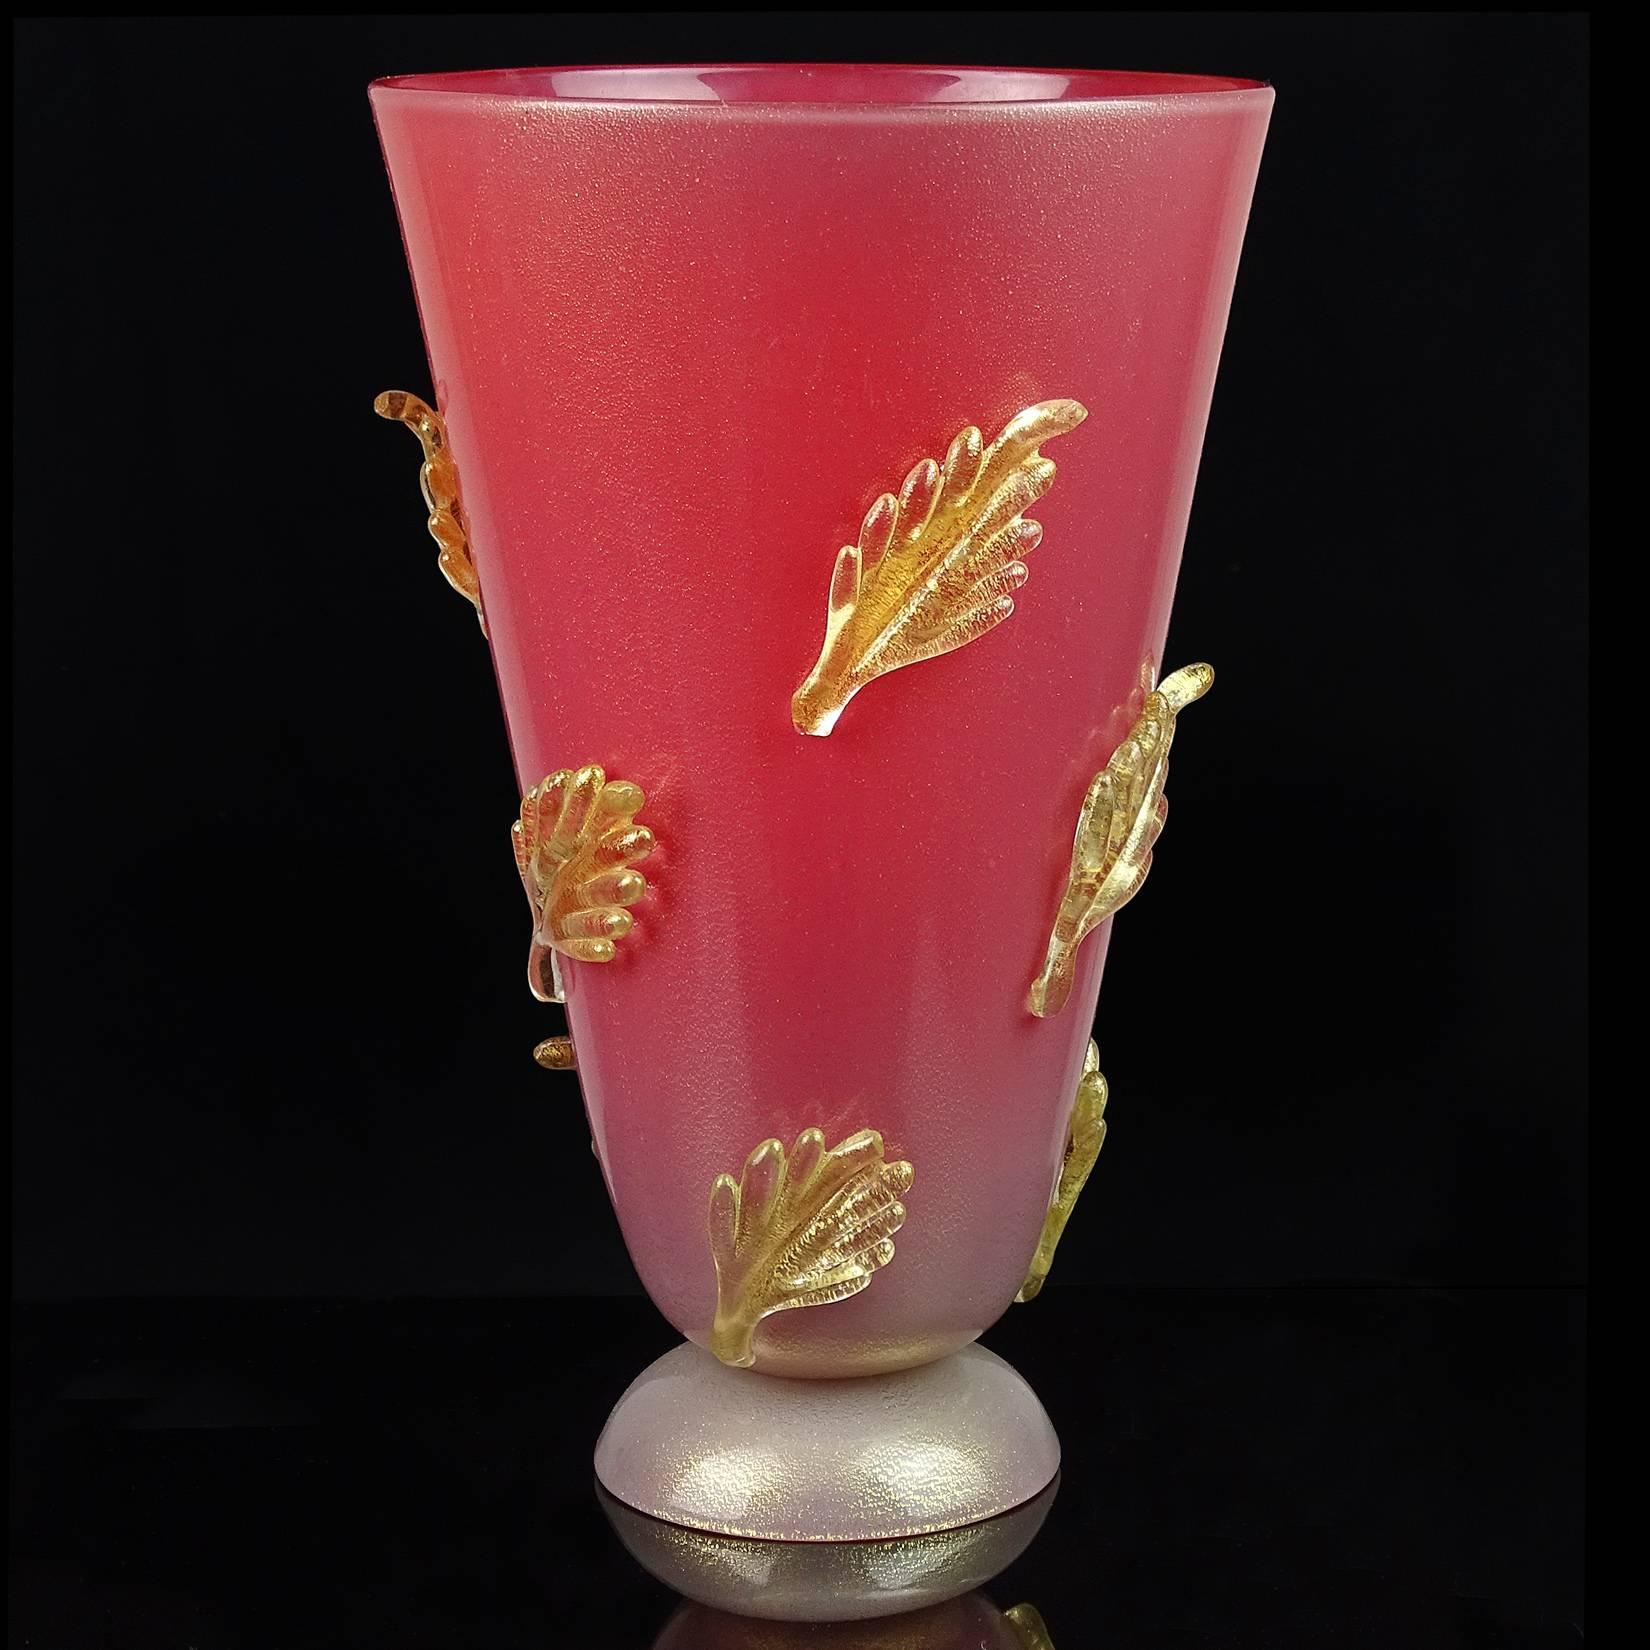 Very rare Murano hand blown gold flecks over red/pink, with applied gold leafs Italian art glass flower vase. Attributed to Barovier Seguso Ferro, circa 1930s-1940s. A similar vase is shown in the Seguso Vetri D' Arte book, page 134. Measures just